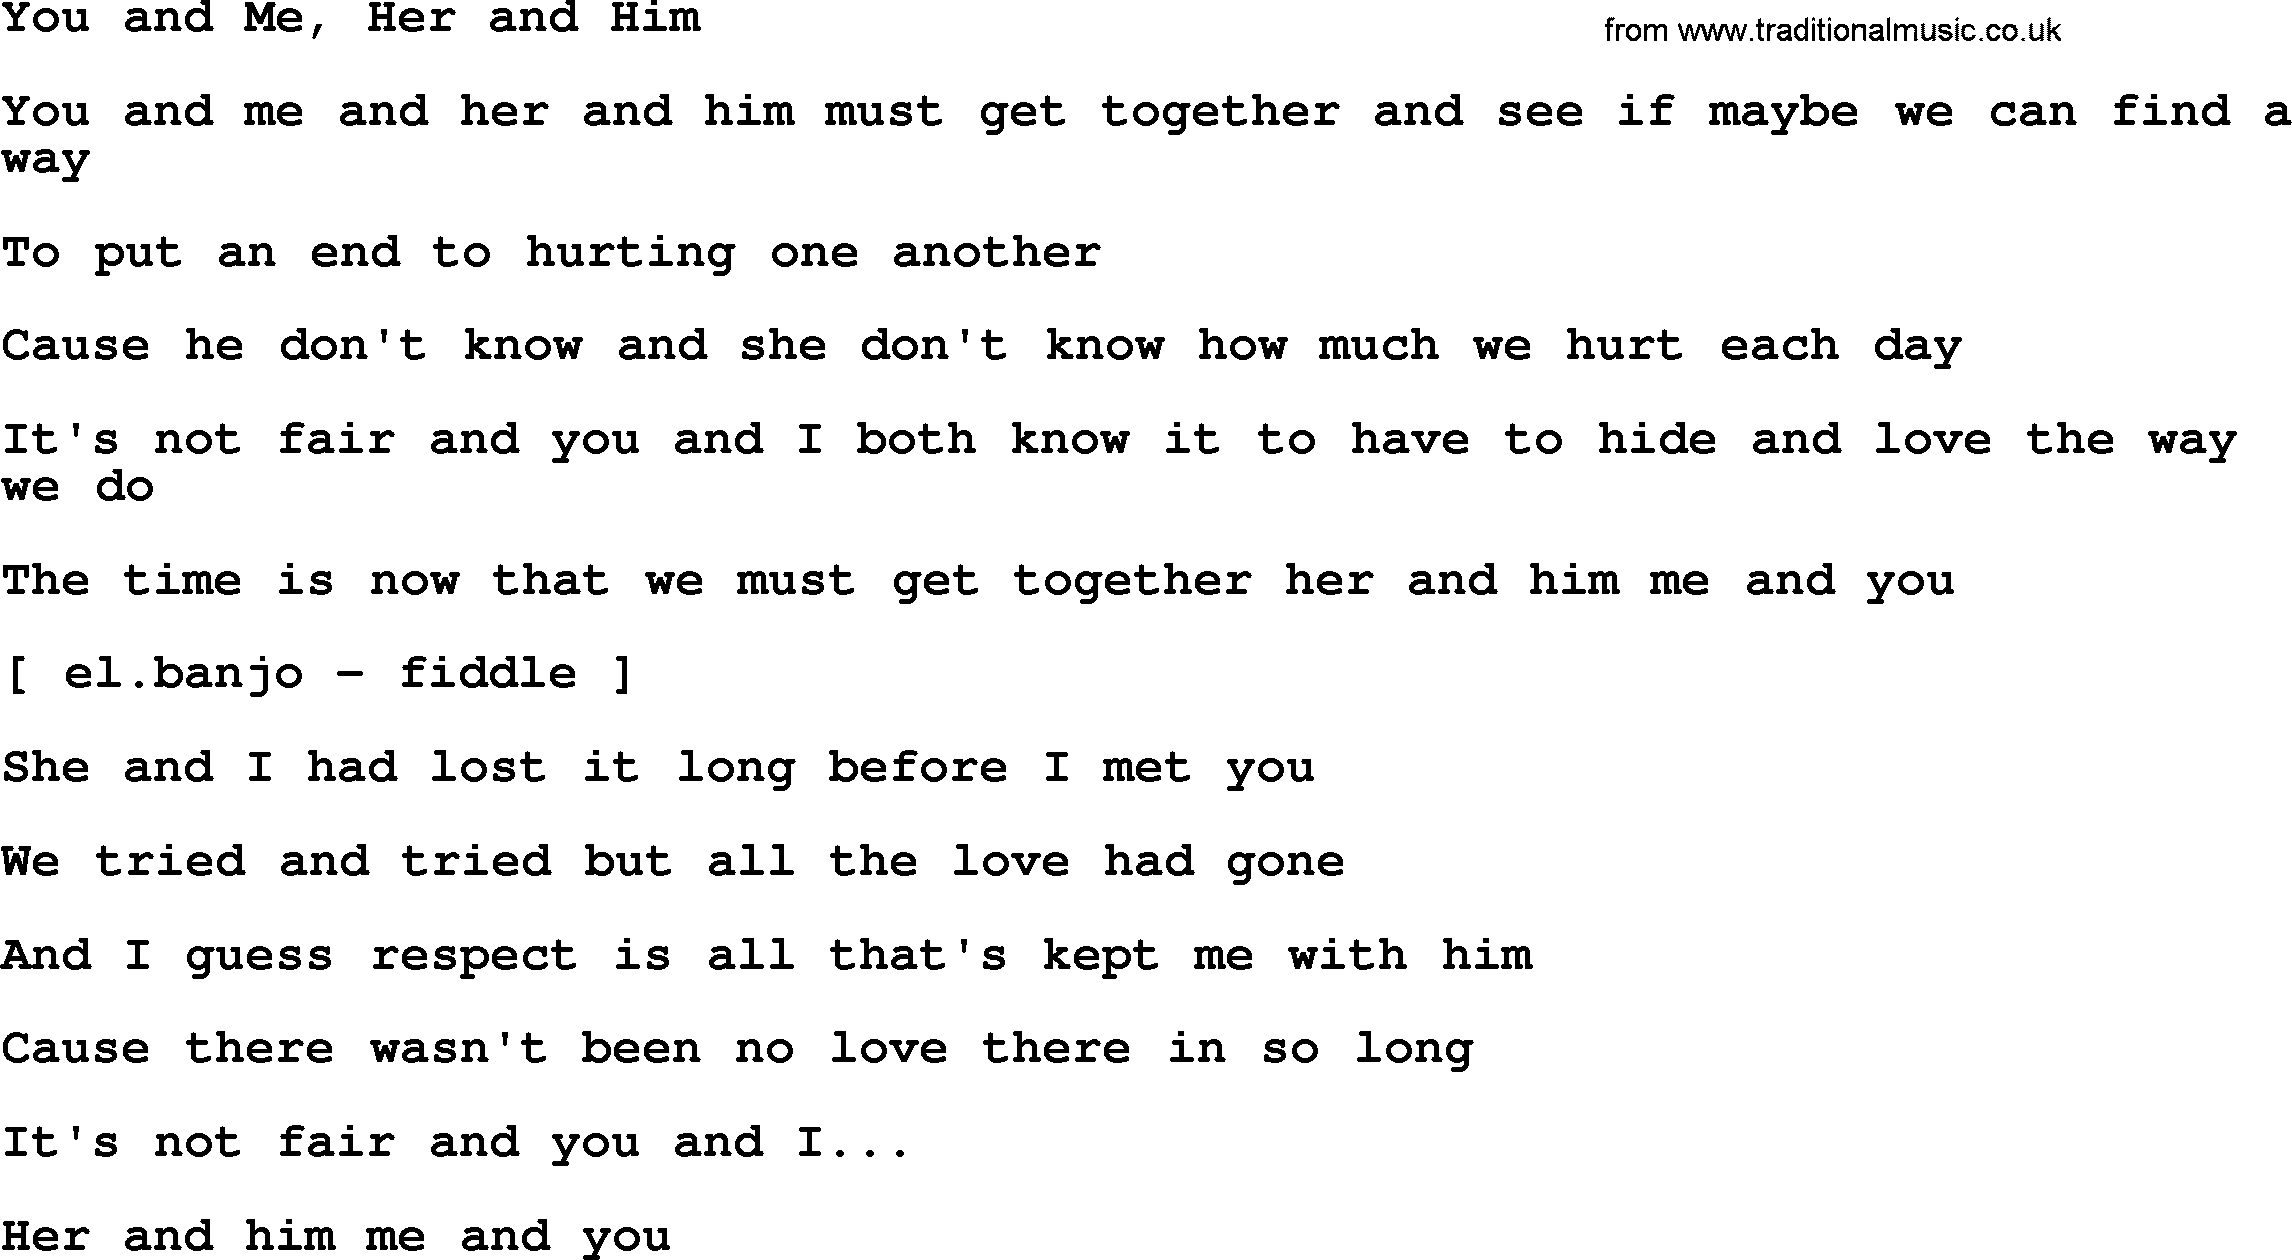 Dolly Parton song You And Me, Her And Him.txt lyrics